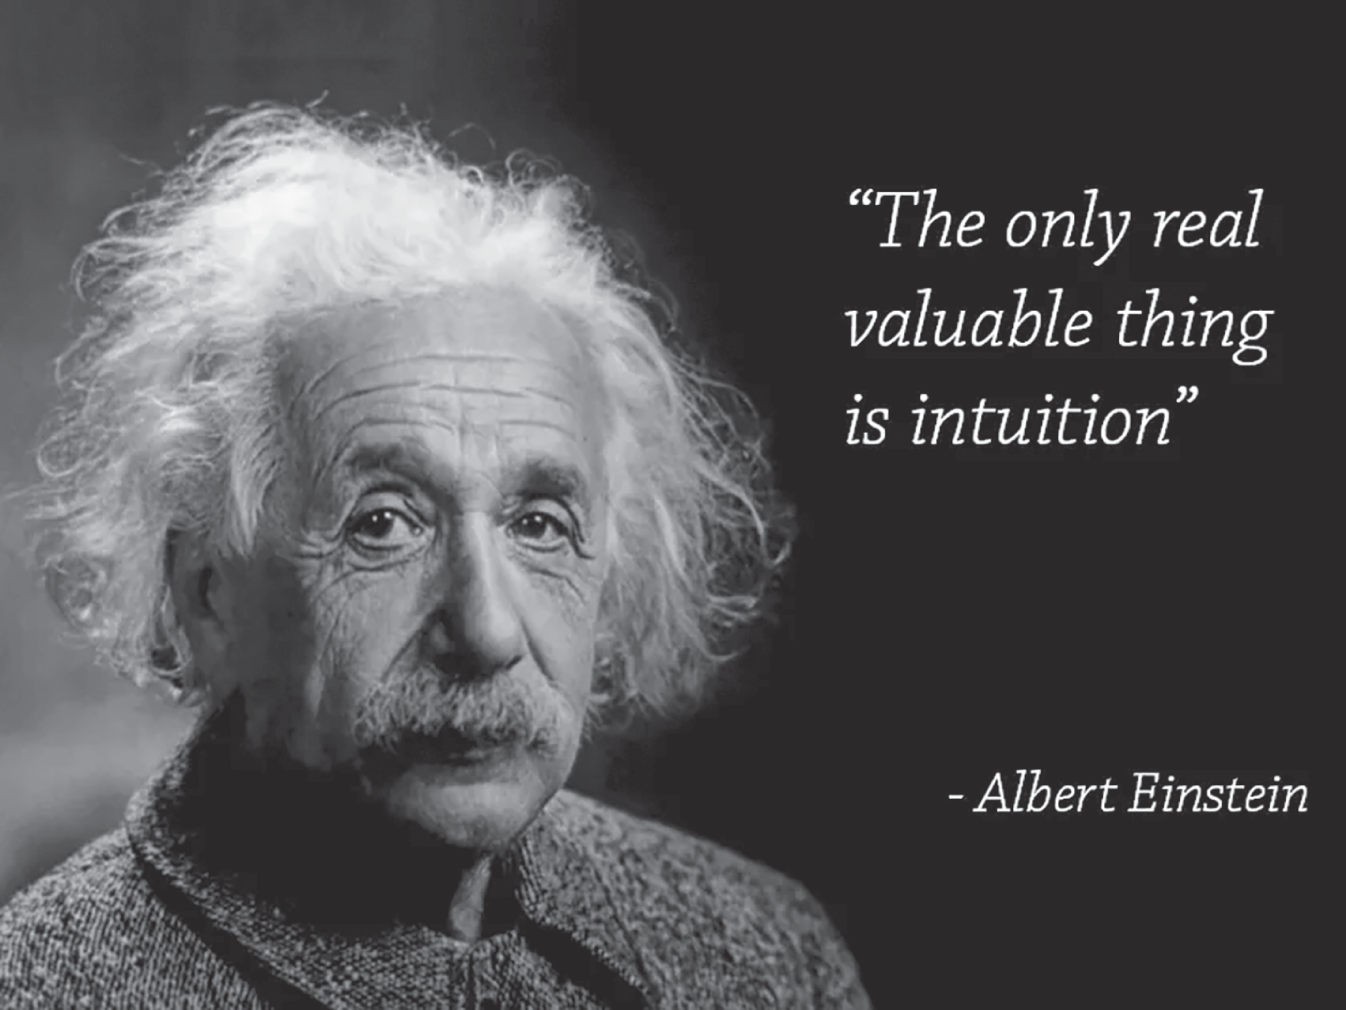 Photograph of the scientist Albert Einstein with one of his famous quotes displayed.